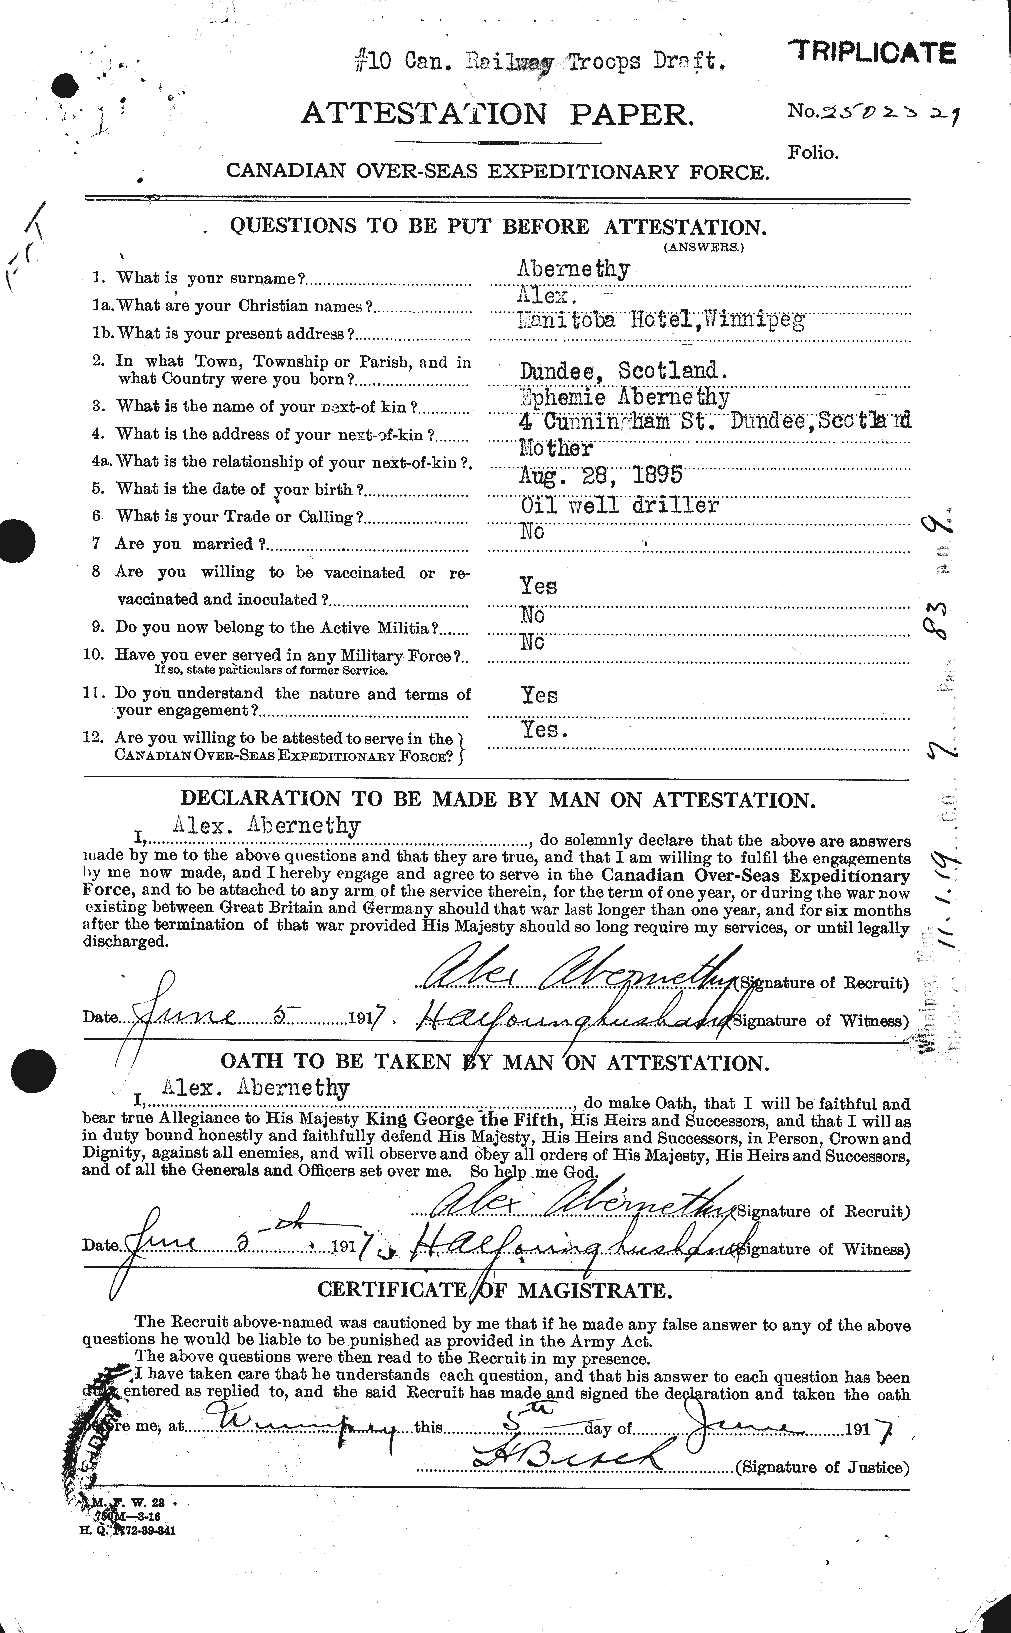 Personnel Records of the First World War - CEF 201499a